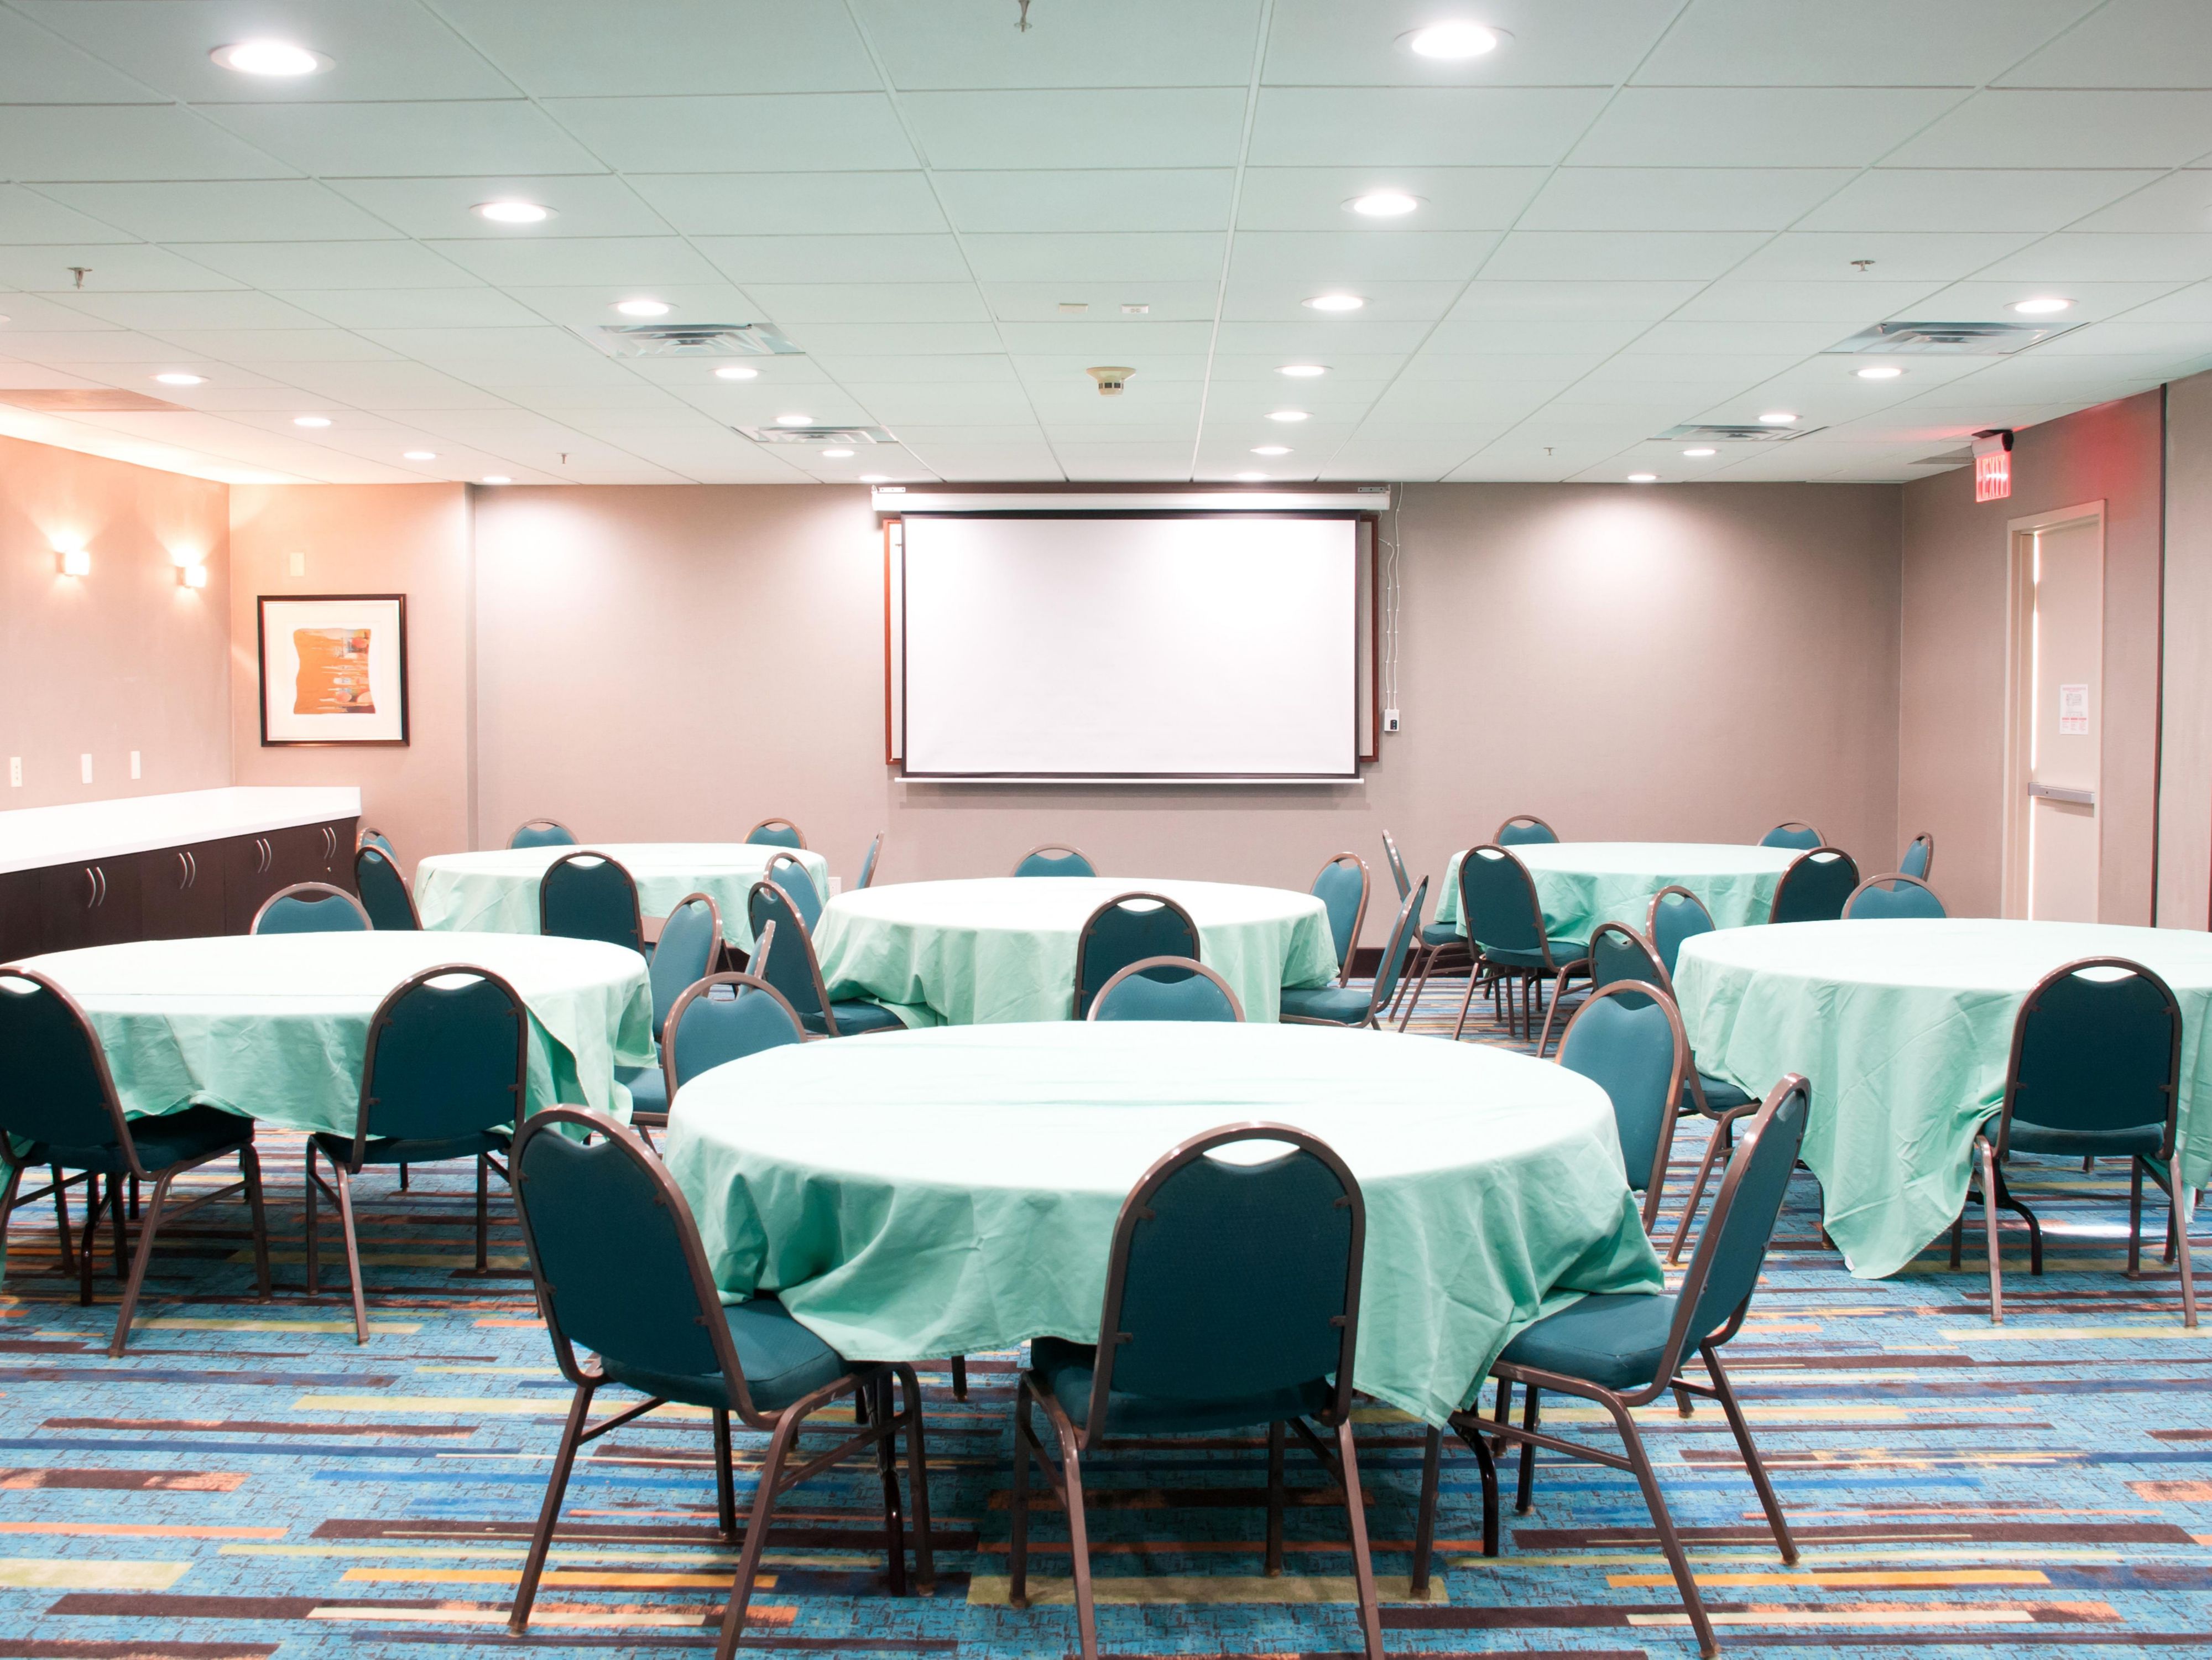 Plan meetings and gatherings in our intimate event venue in Savannah. The Holiday Inn Savannah S - I-95 Gateway offers 1,000 square feet of flexible event space with audiovisual and catering menus. Perfect for small meetings, parties, and events, our contemporary space can accommodate up to 50 people.
